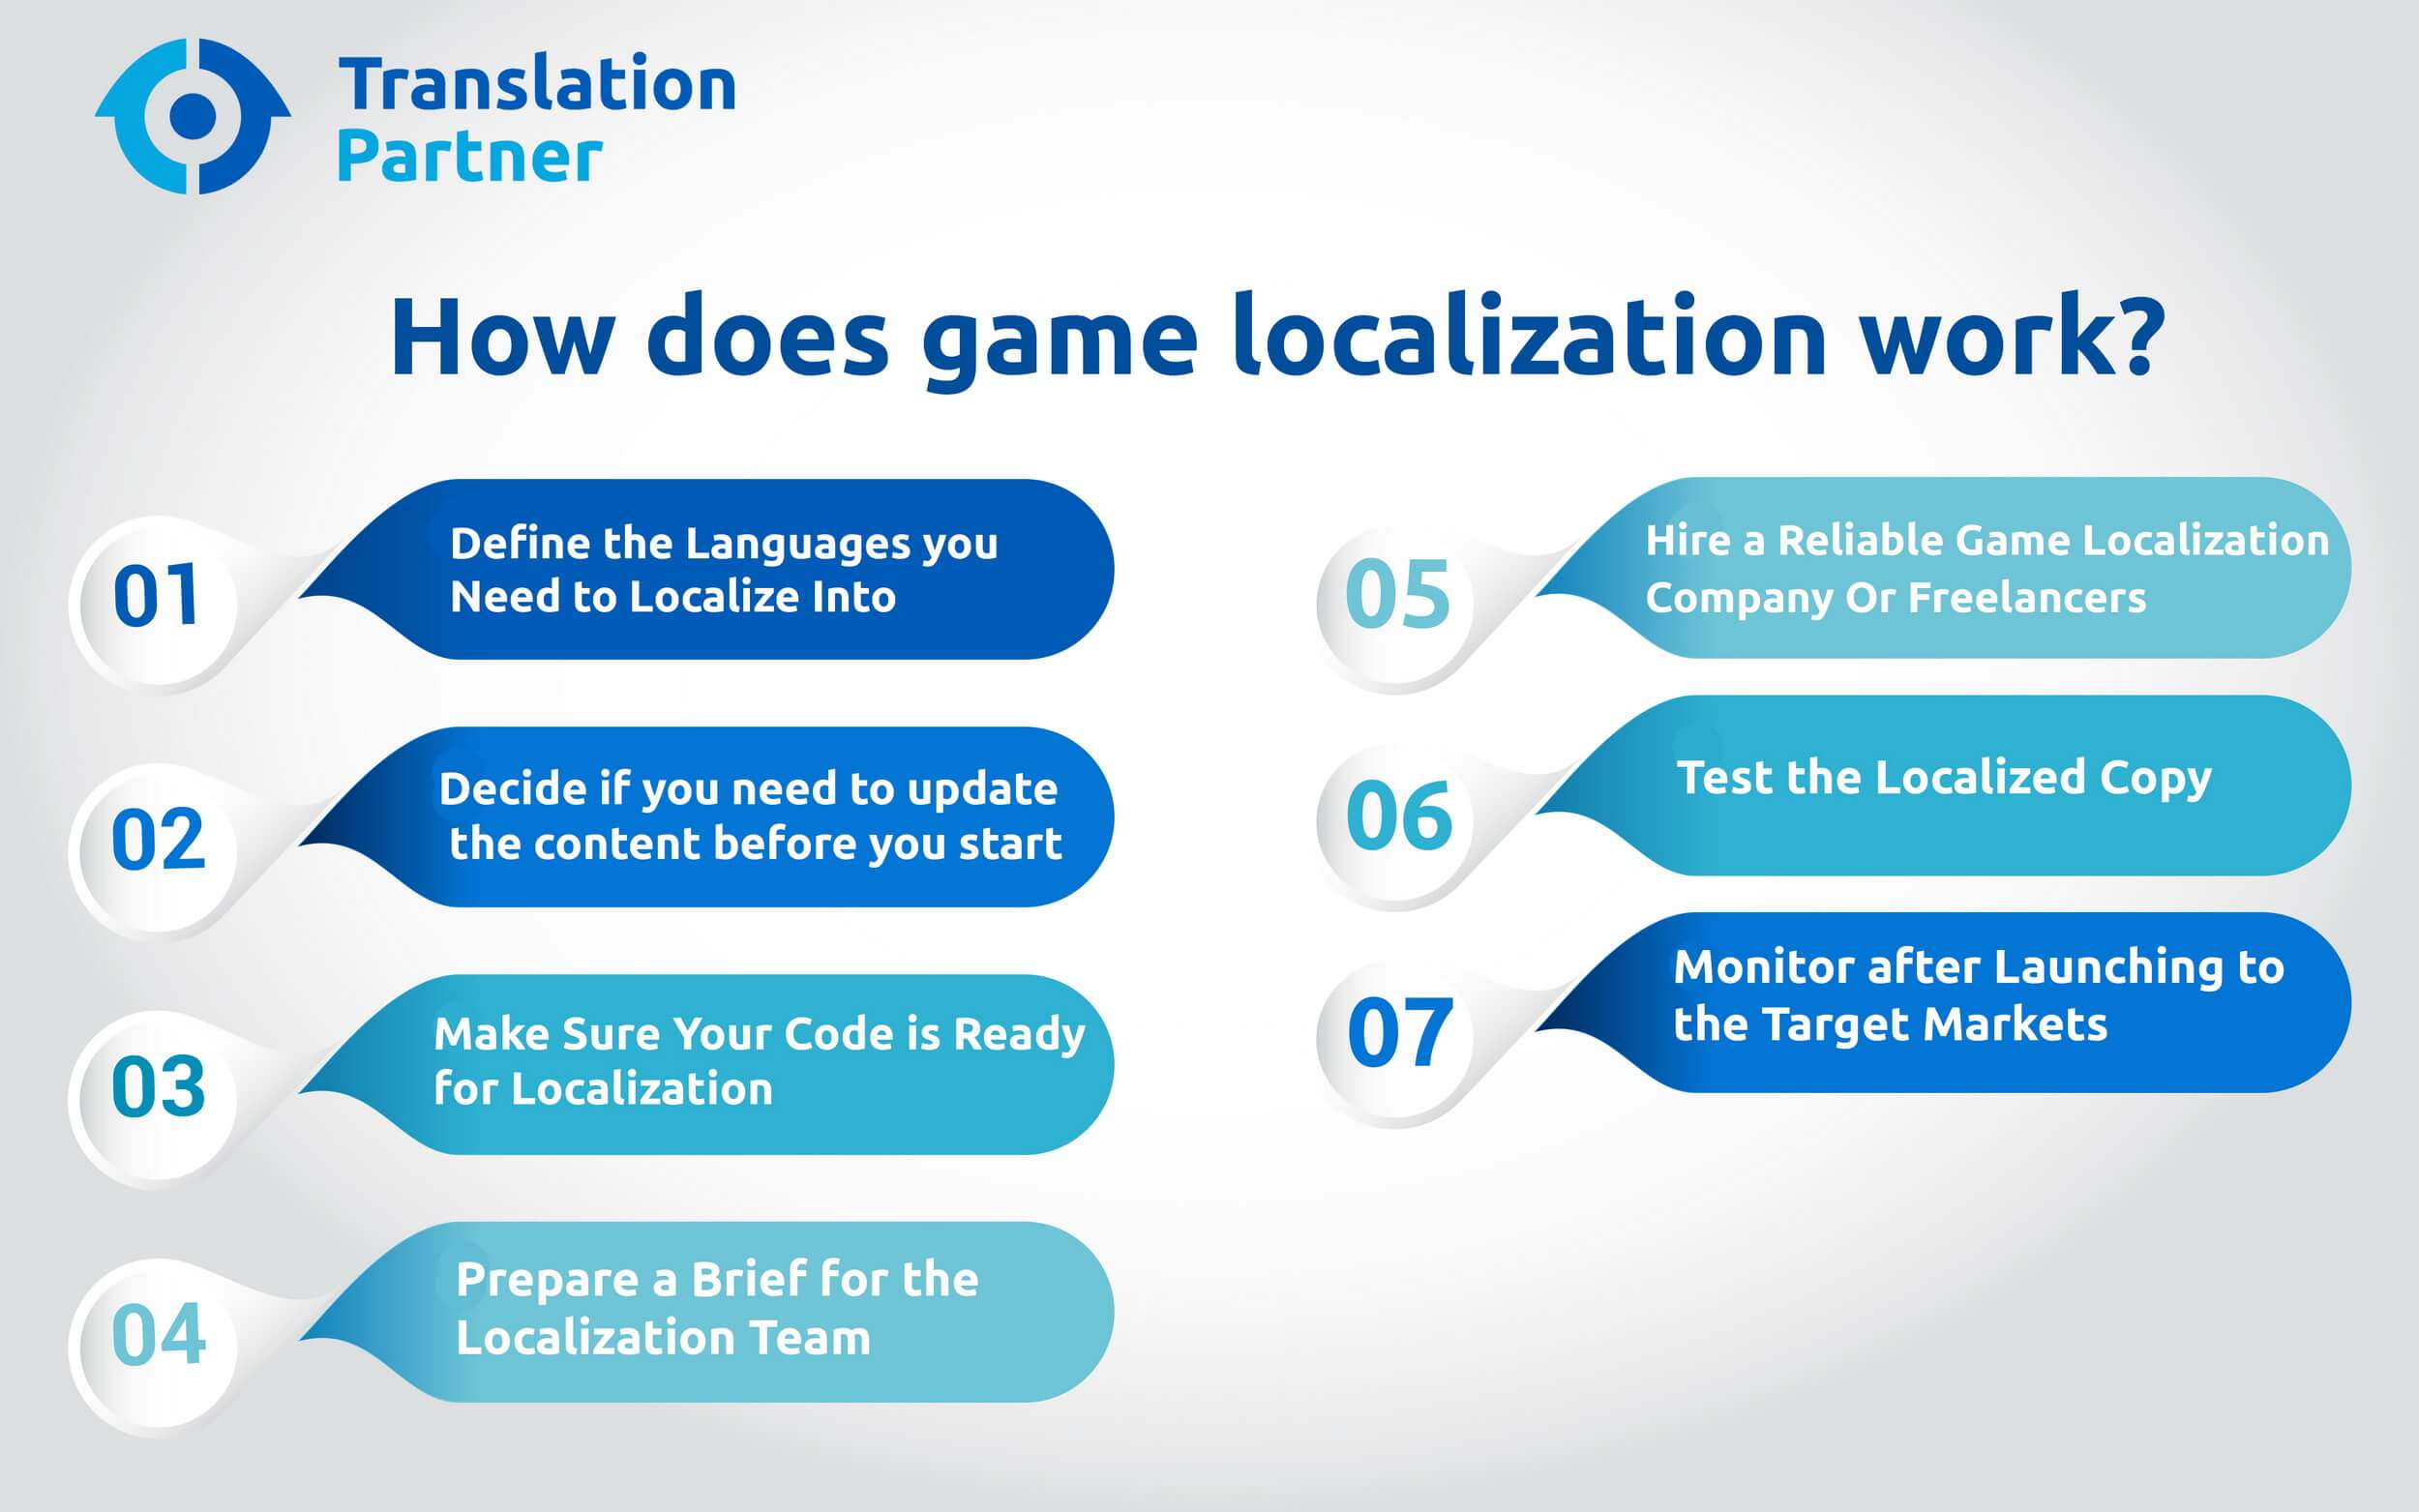 How dose game localization work